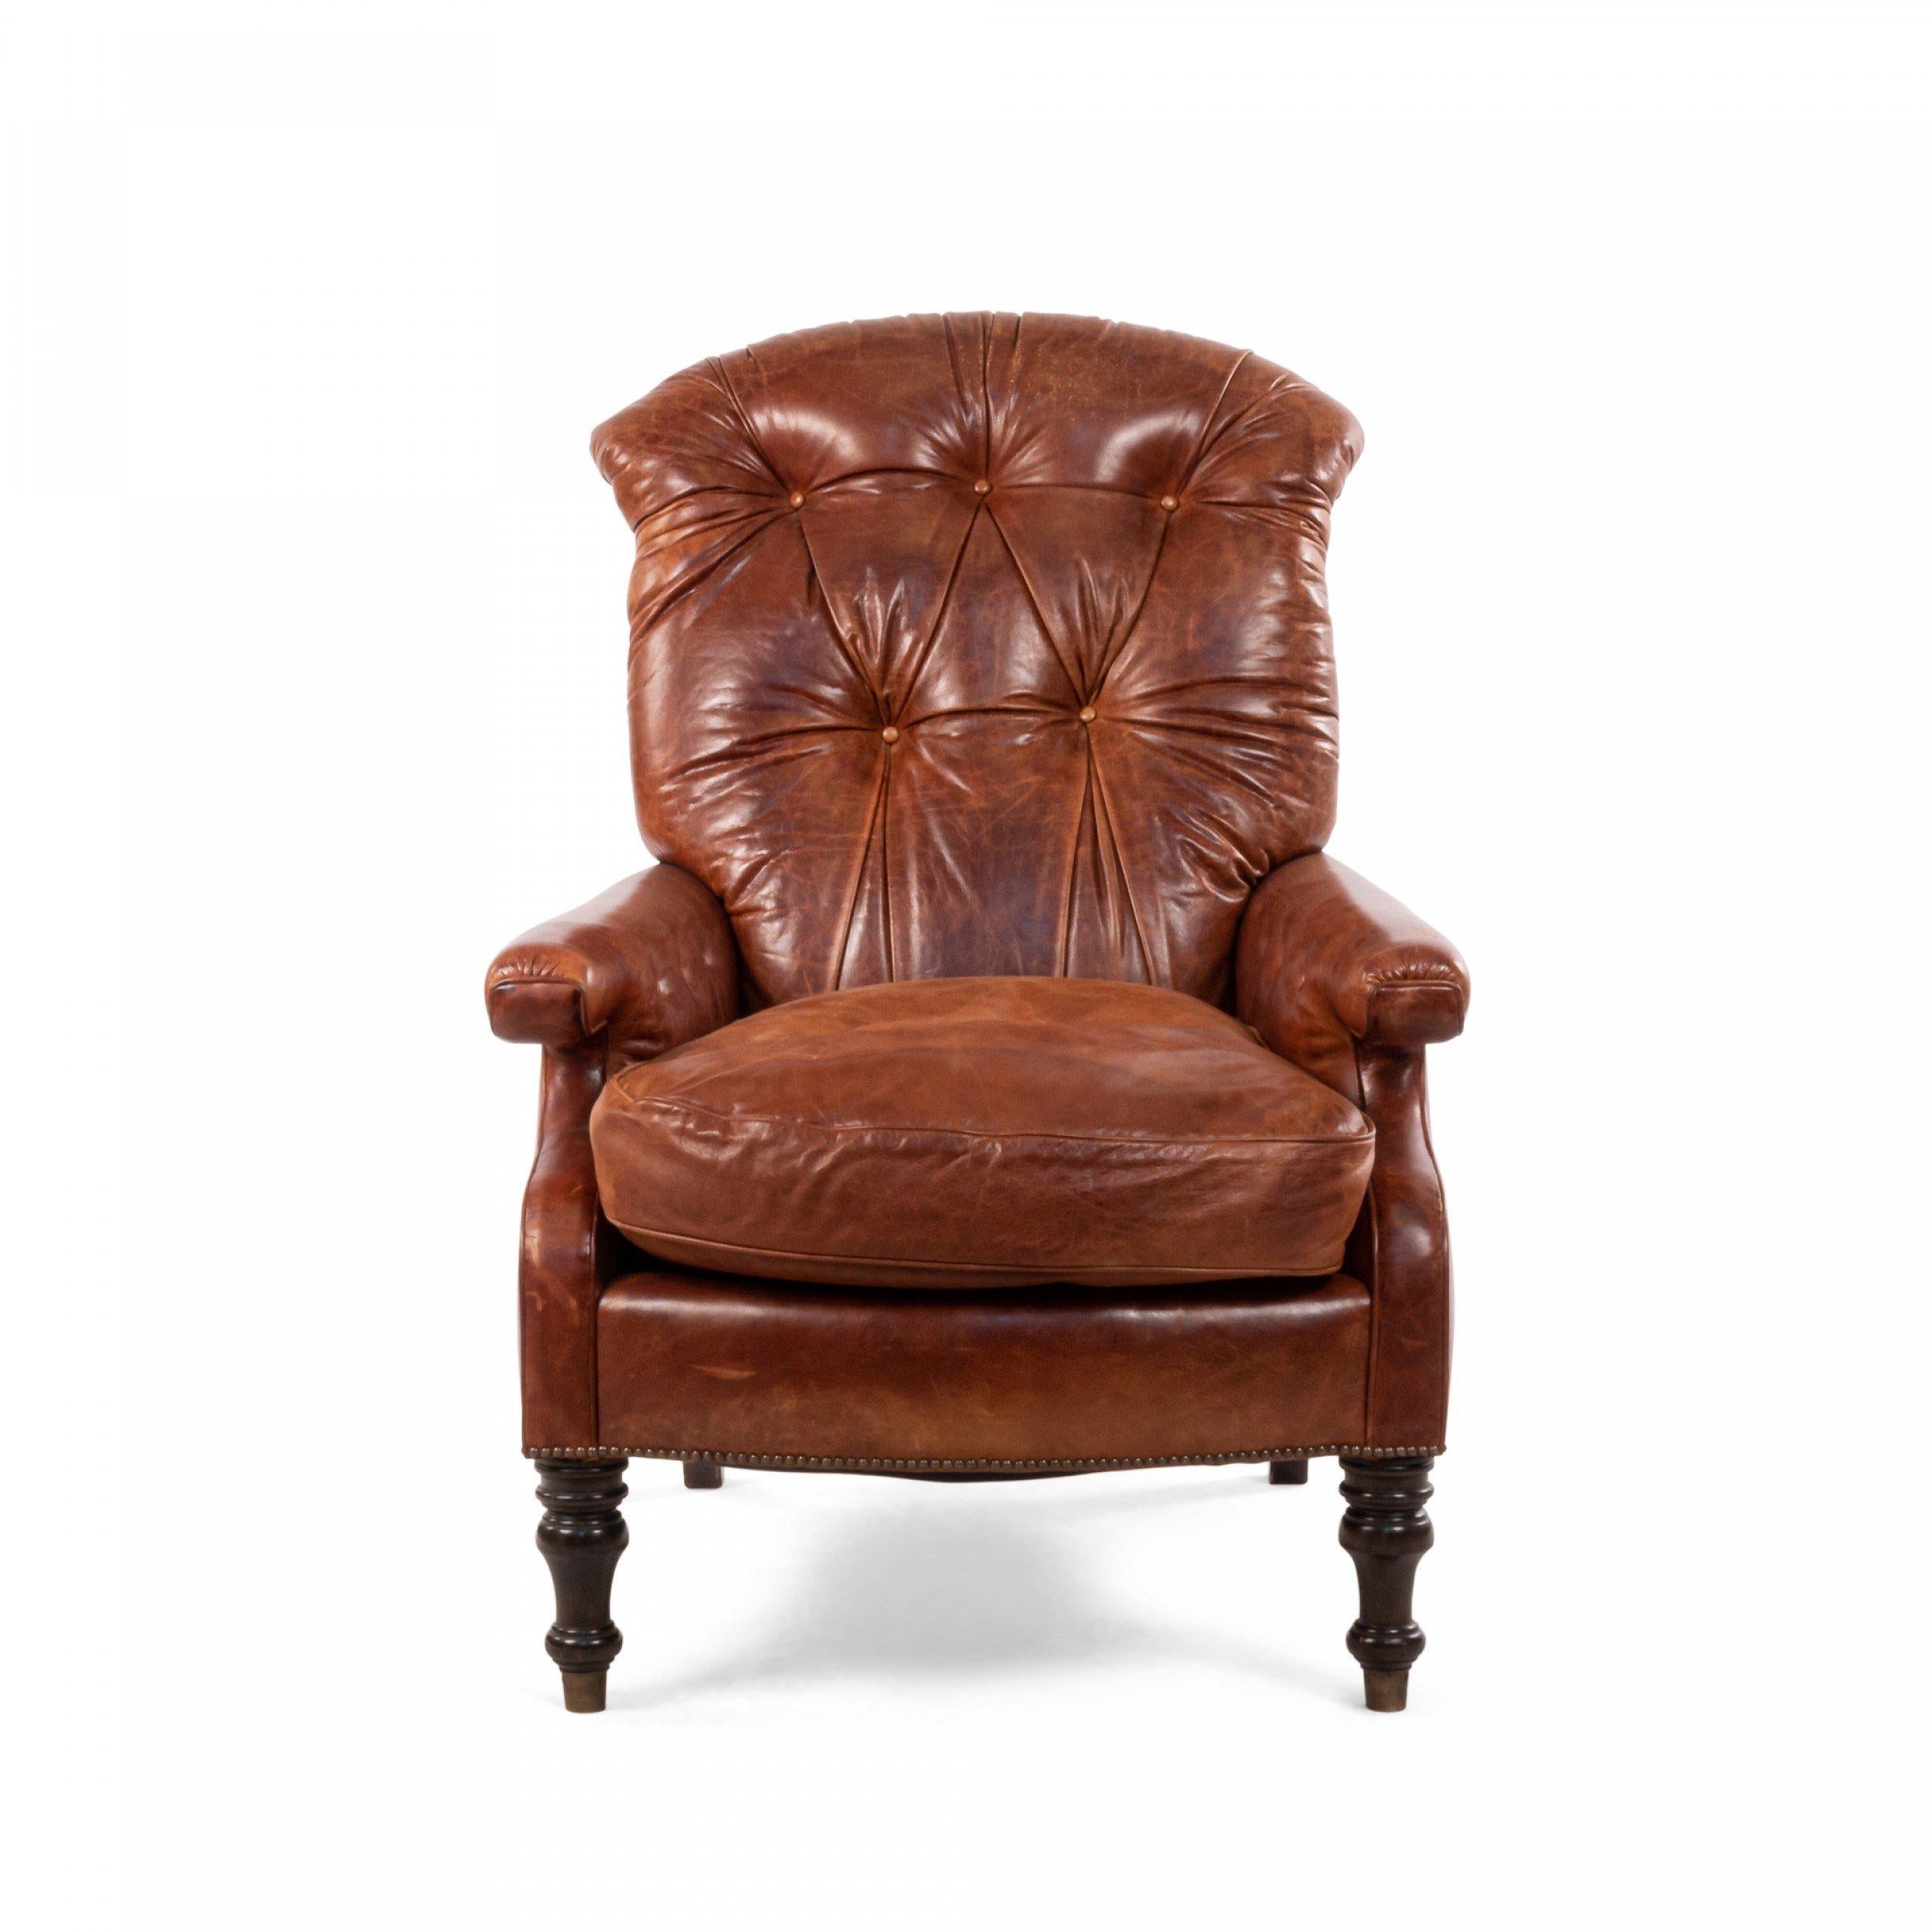 English Victorian Edwardian-style modern chestnut brown leather tufted back easy chair with turned mahogany legs ending in brass caps. 
 